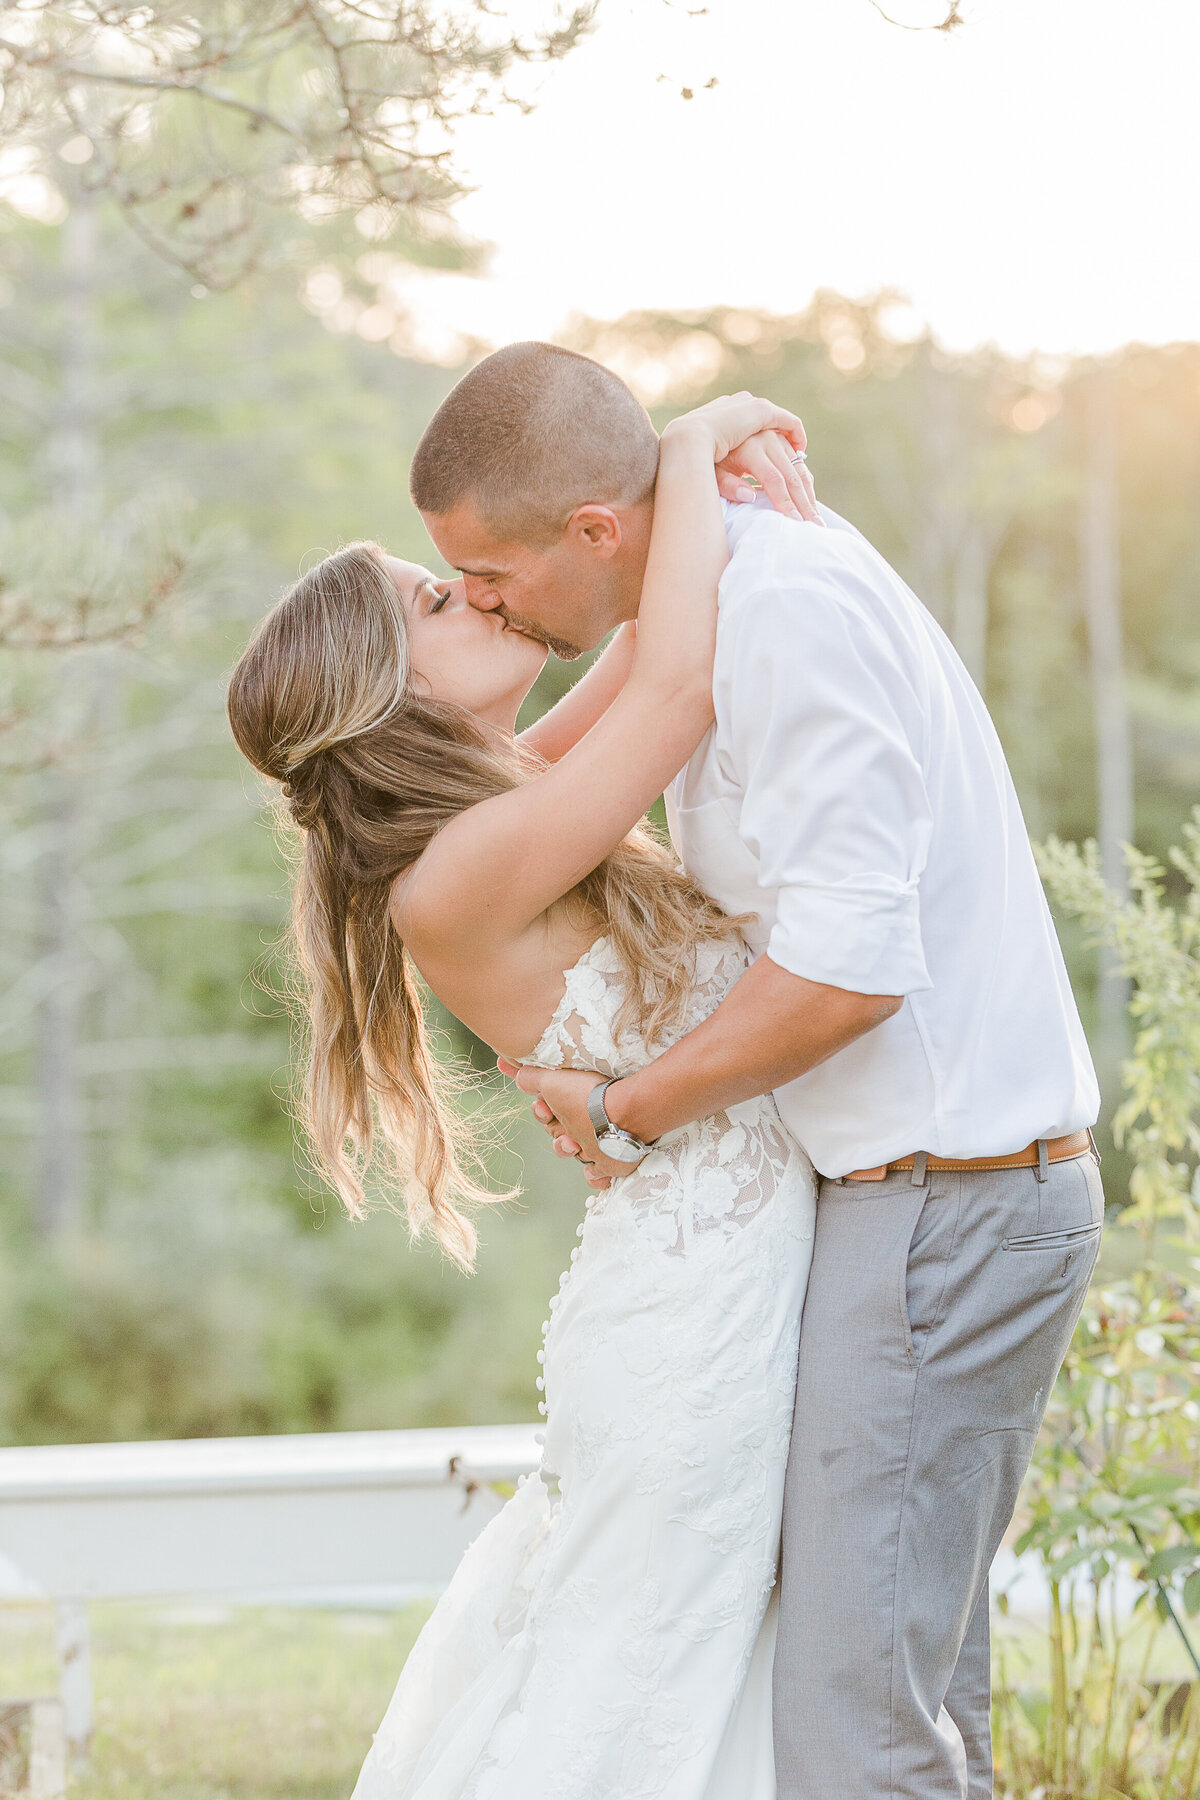 Bride and groom share a kiss at golden hour during their wedding reception at the Five Bridge Inn. Captured by best Massachusetts wedding photographer Lia Rose Weddings.